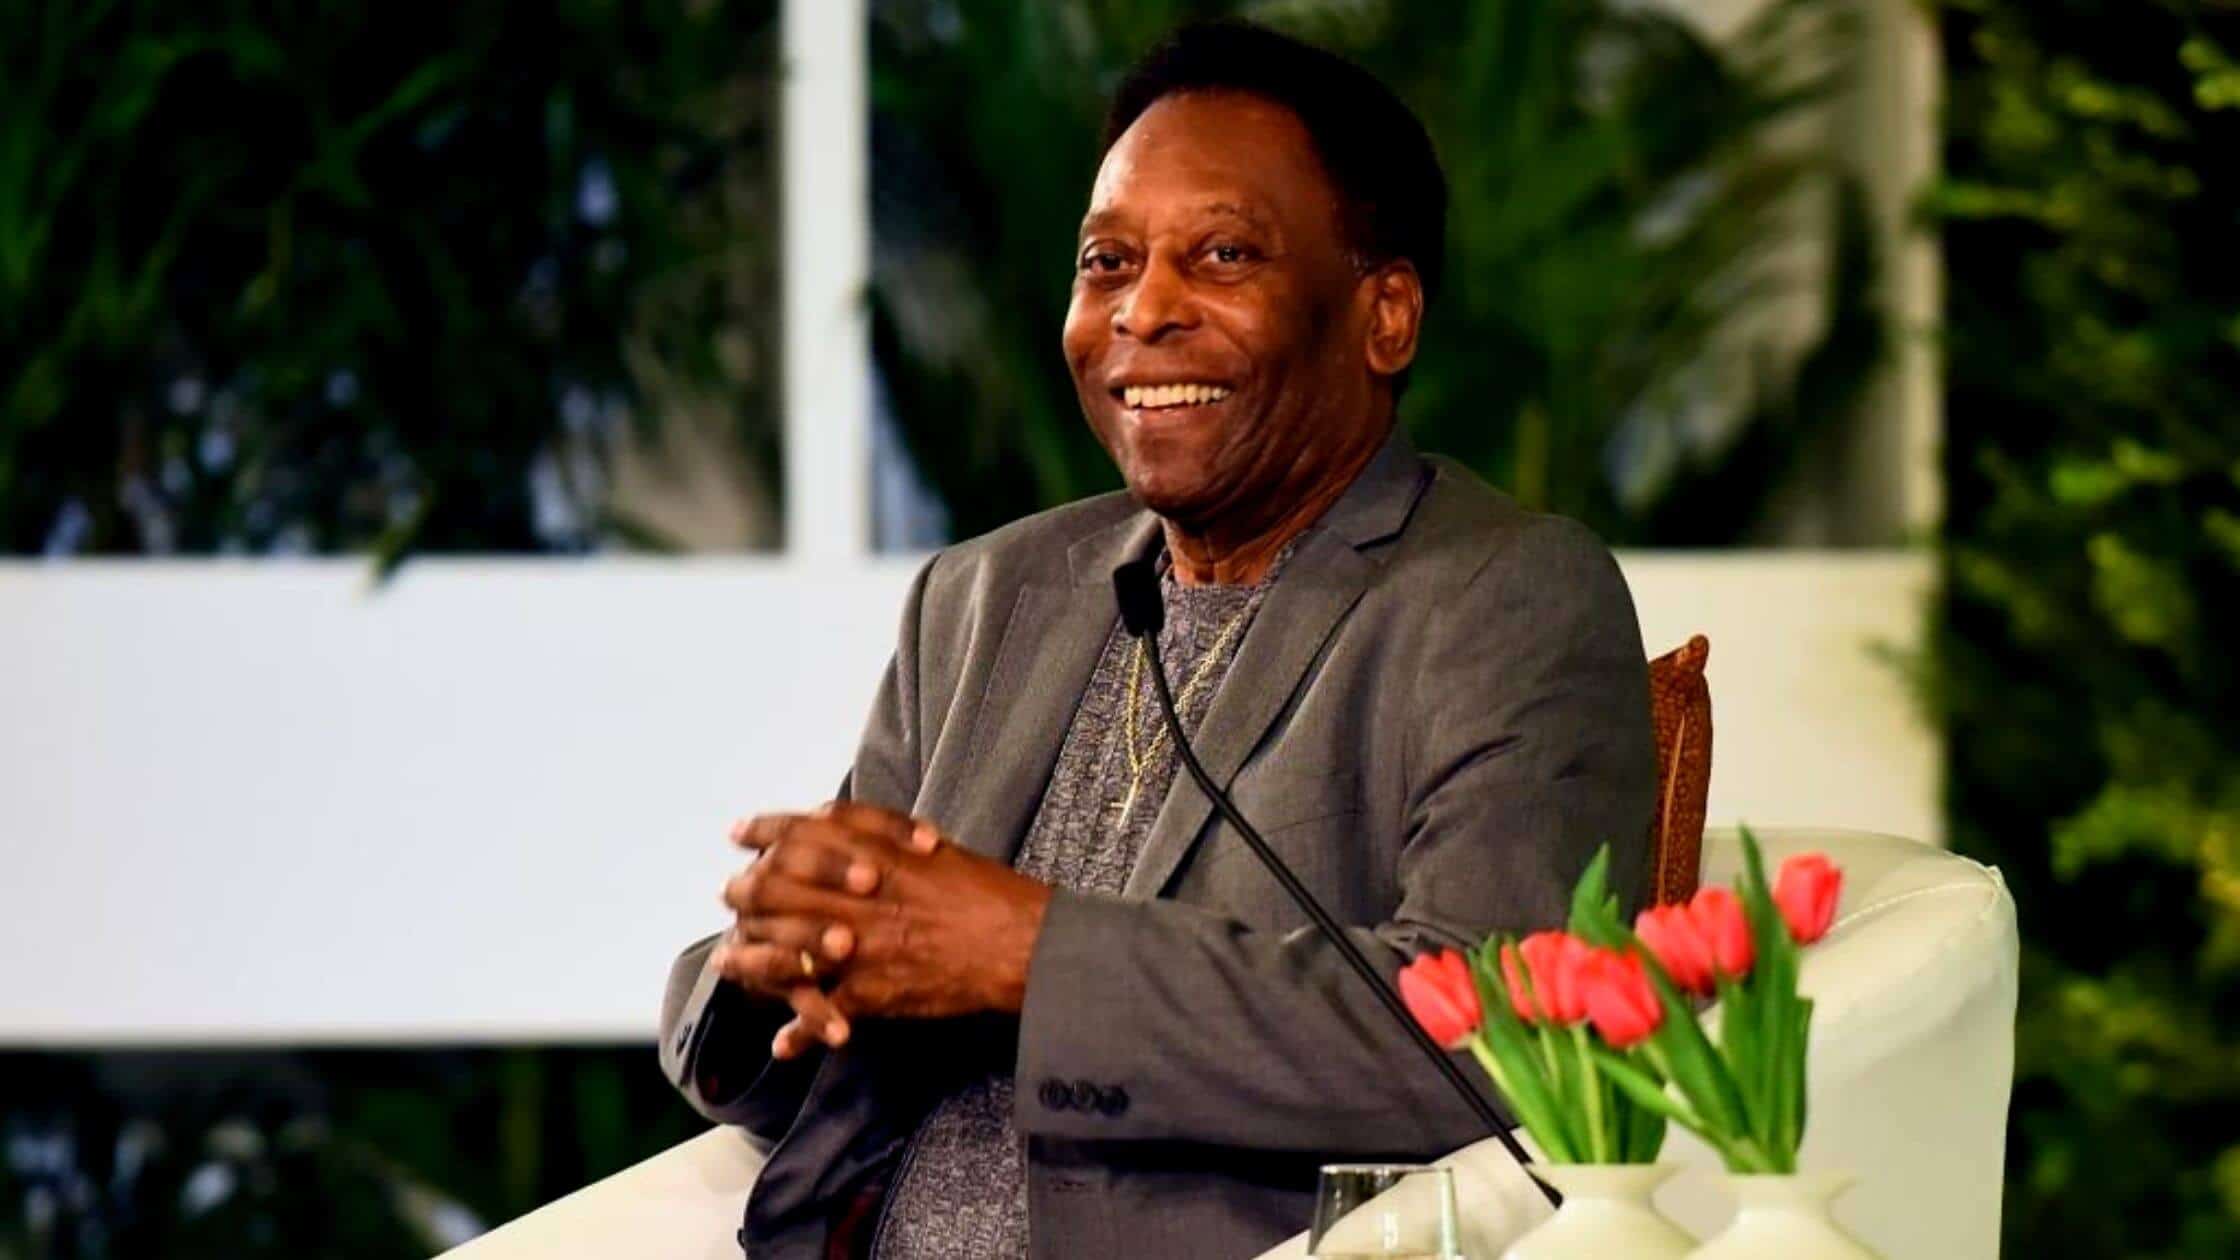 The Legendary Footballer Pelé Has Passed Away At The Age Of 82